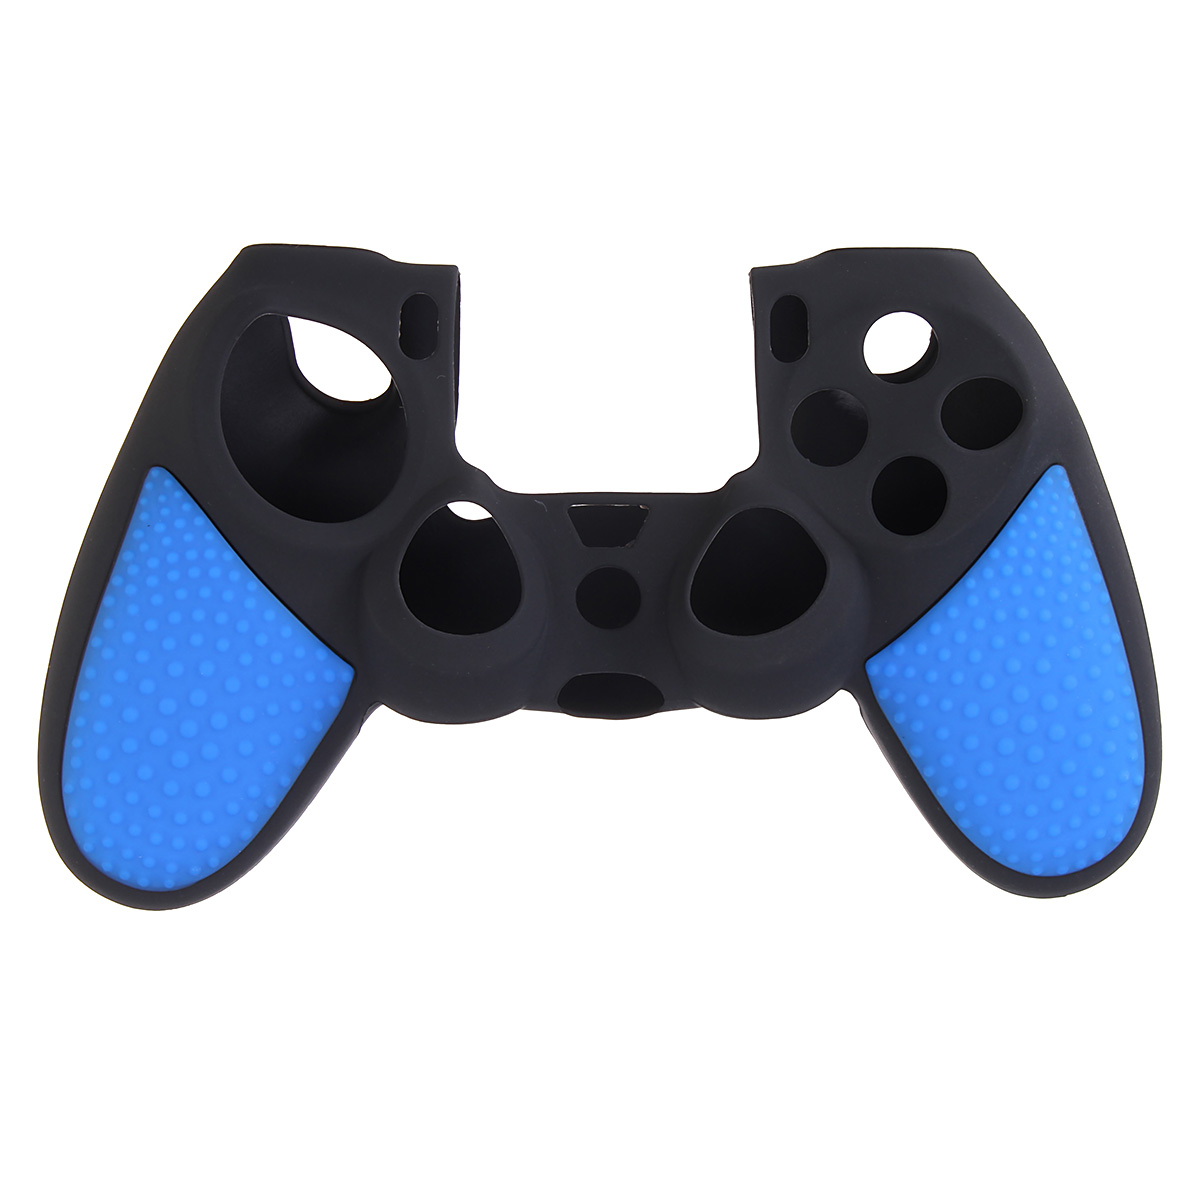 Silicon Cover Case Protection Skin for SONY for Playstation 4 PS4 for Dualshock 4 Game Controller 41